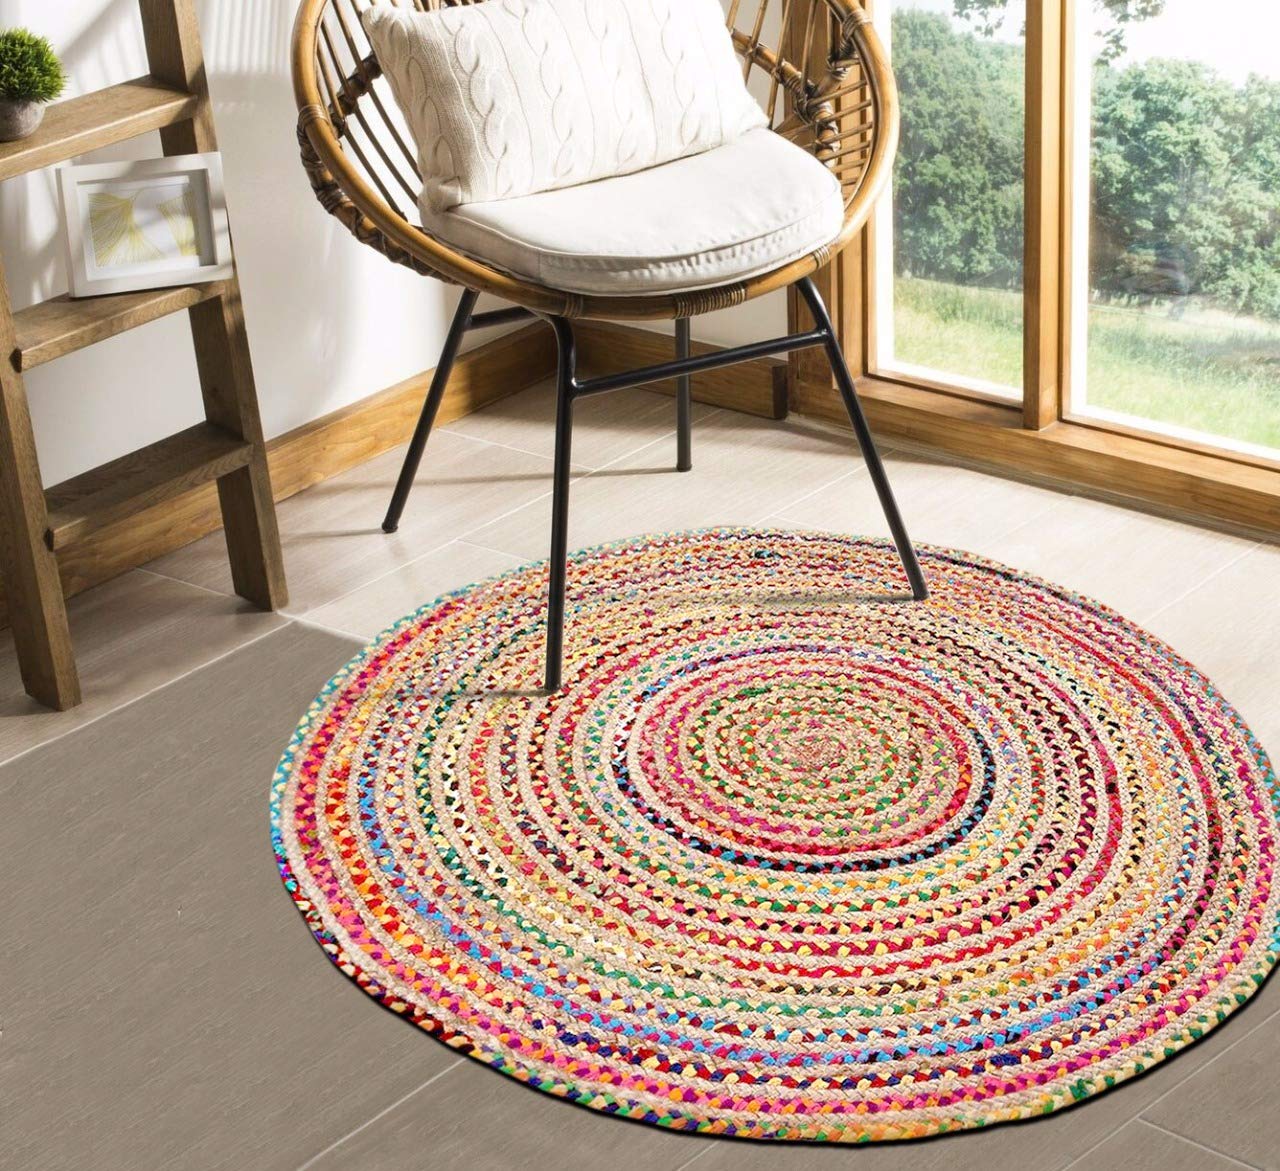 5ft Round Woven Chindi Cotton & Jute Indian Bohemian Braided Area Decorative Rug 